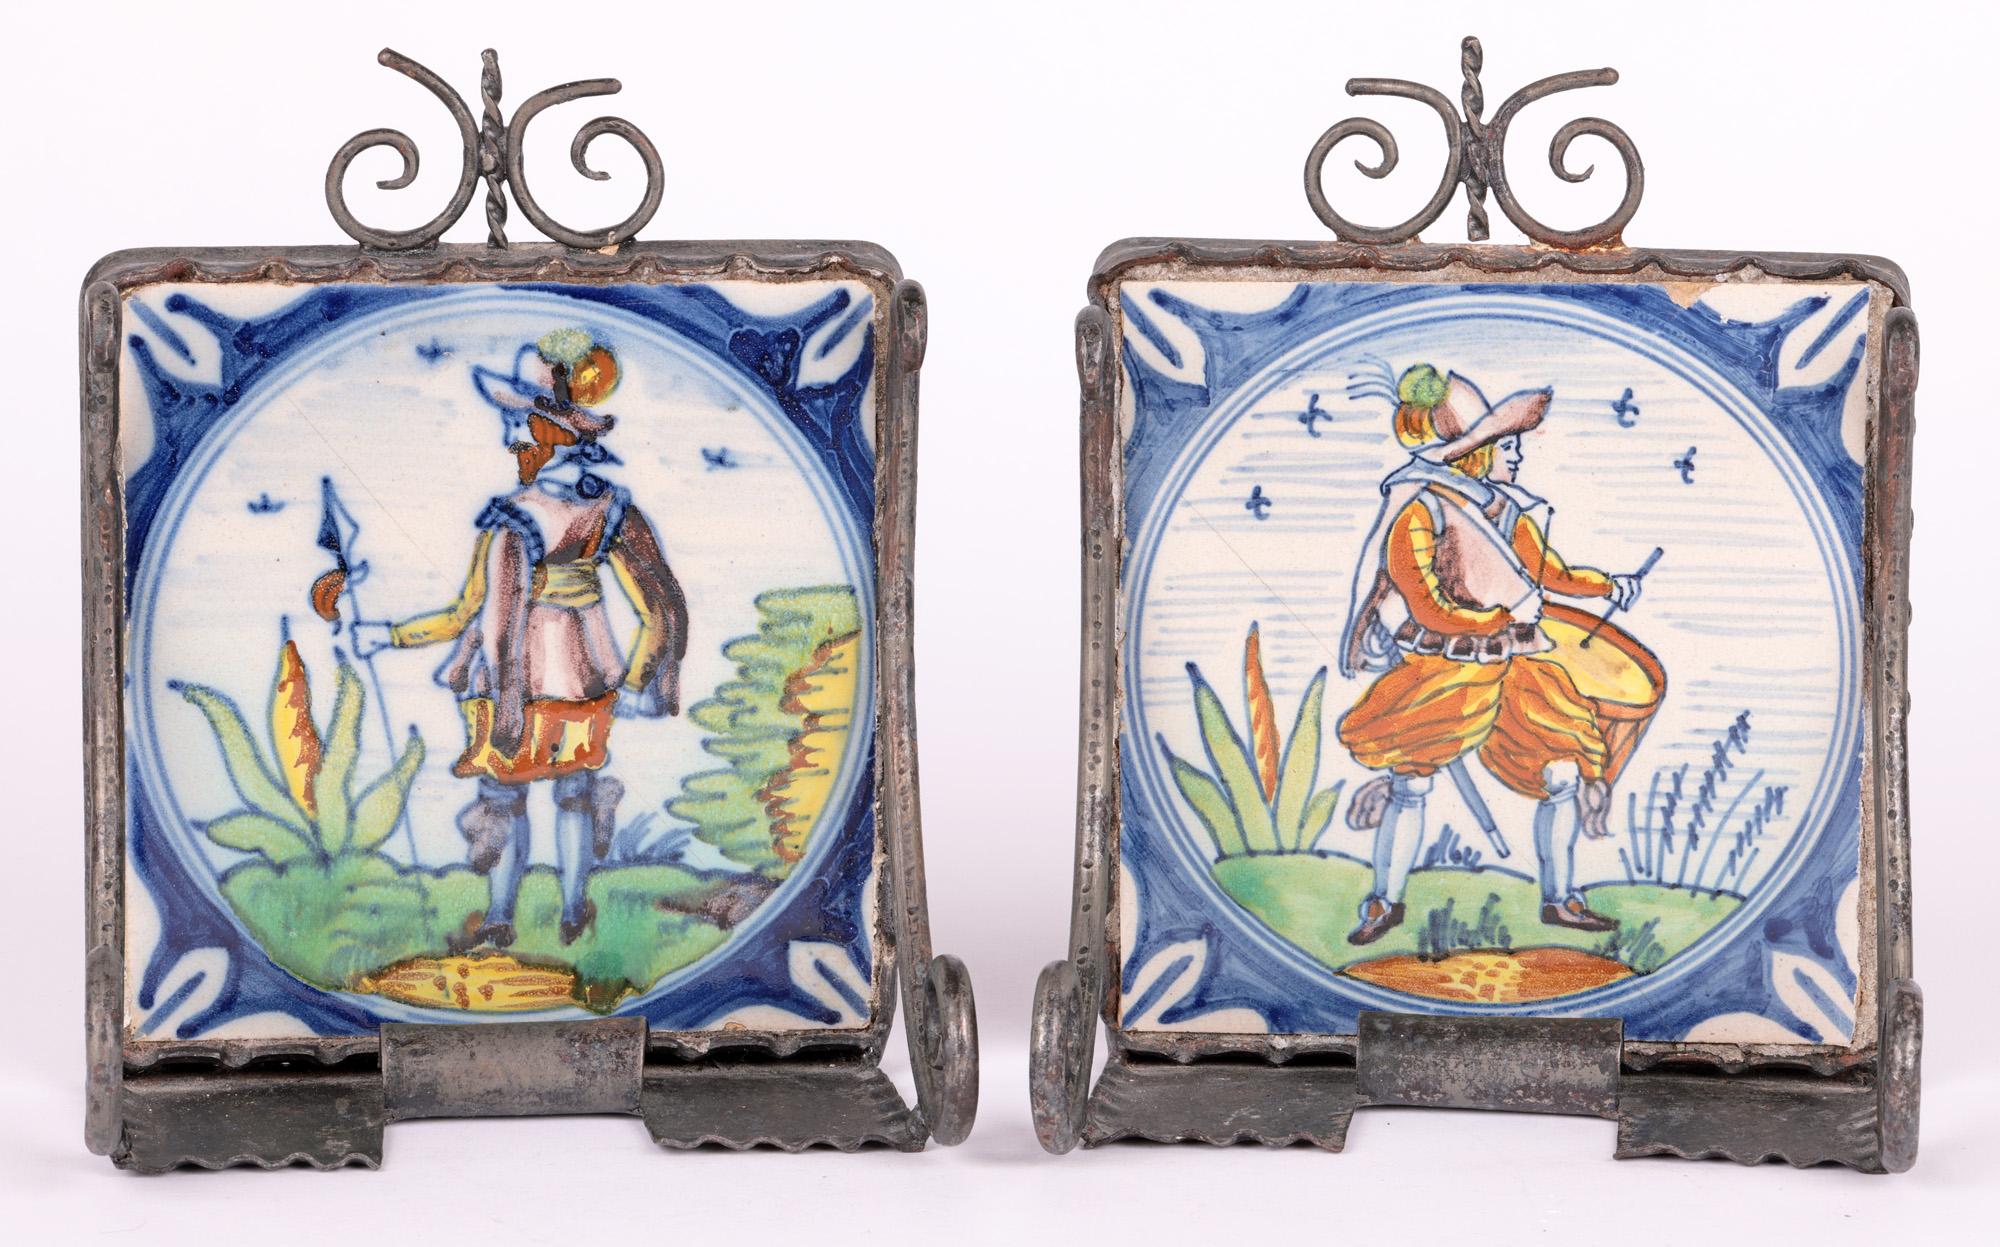 Hand-Crafted Polychrome 18th Century Tile Mounted Metal Bookends